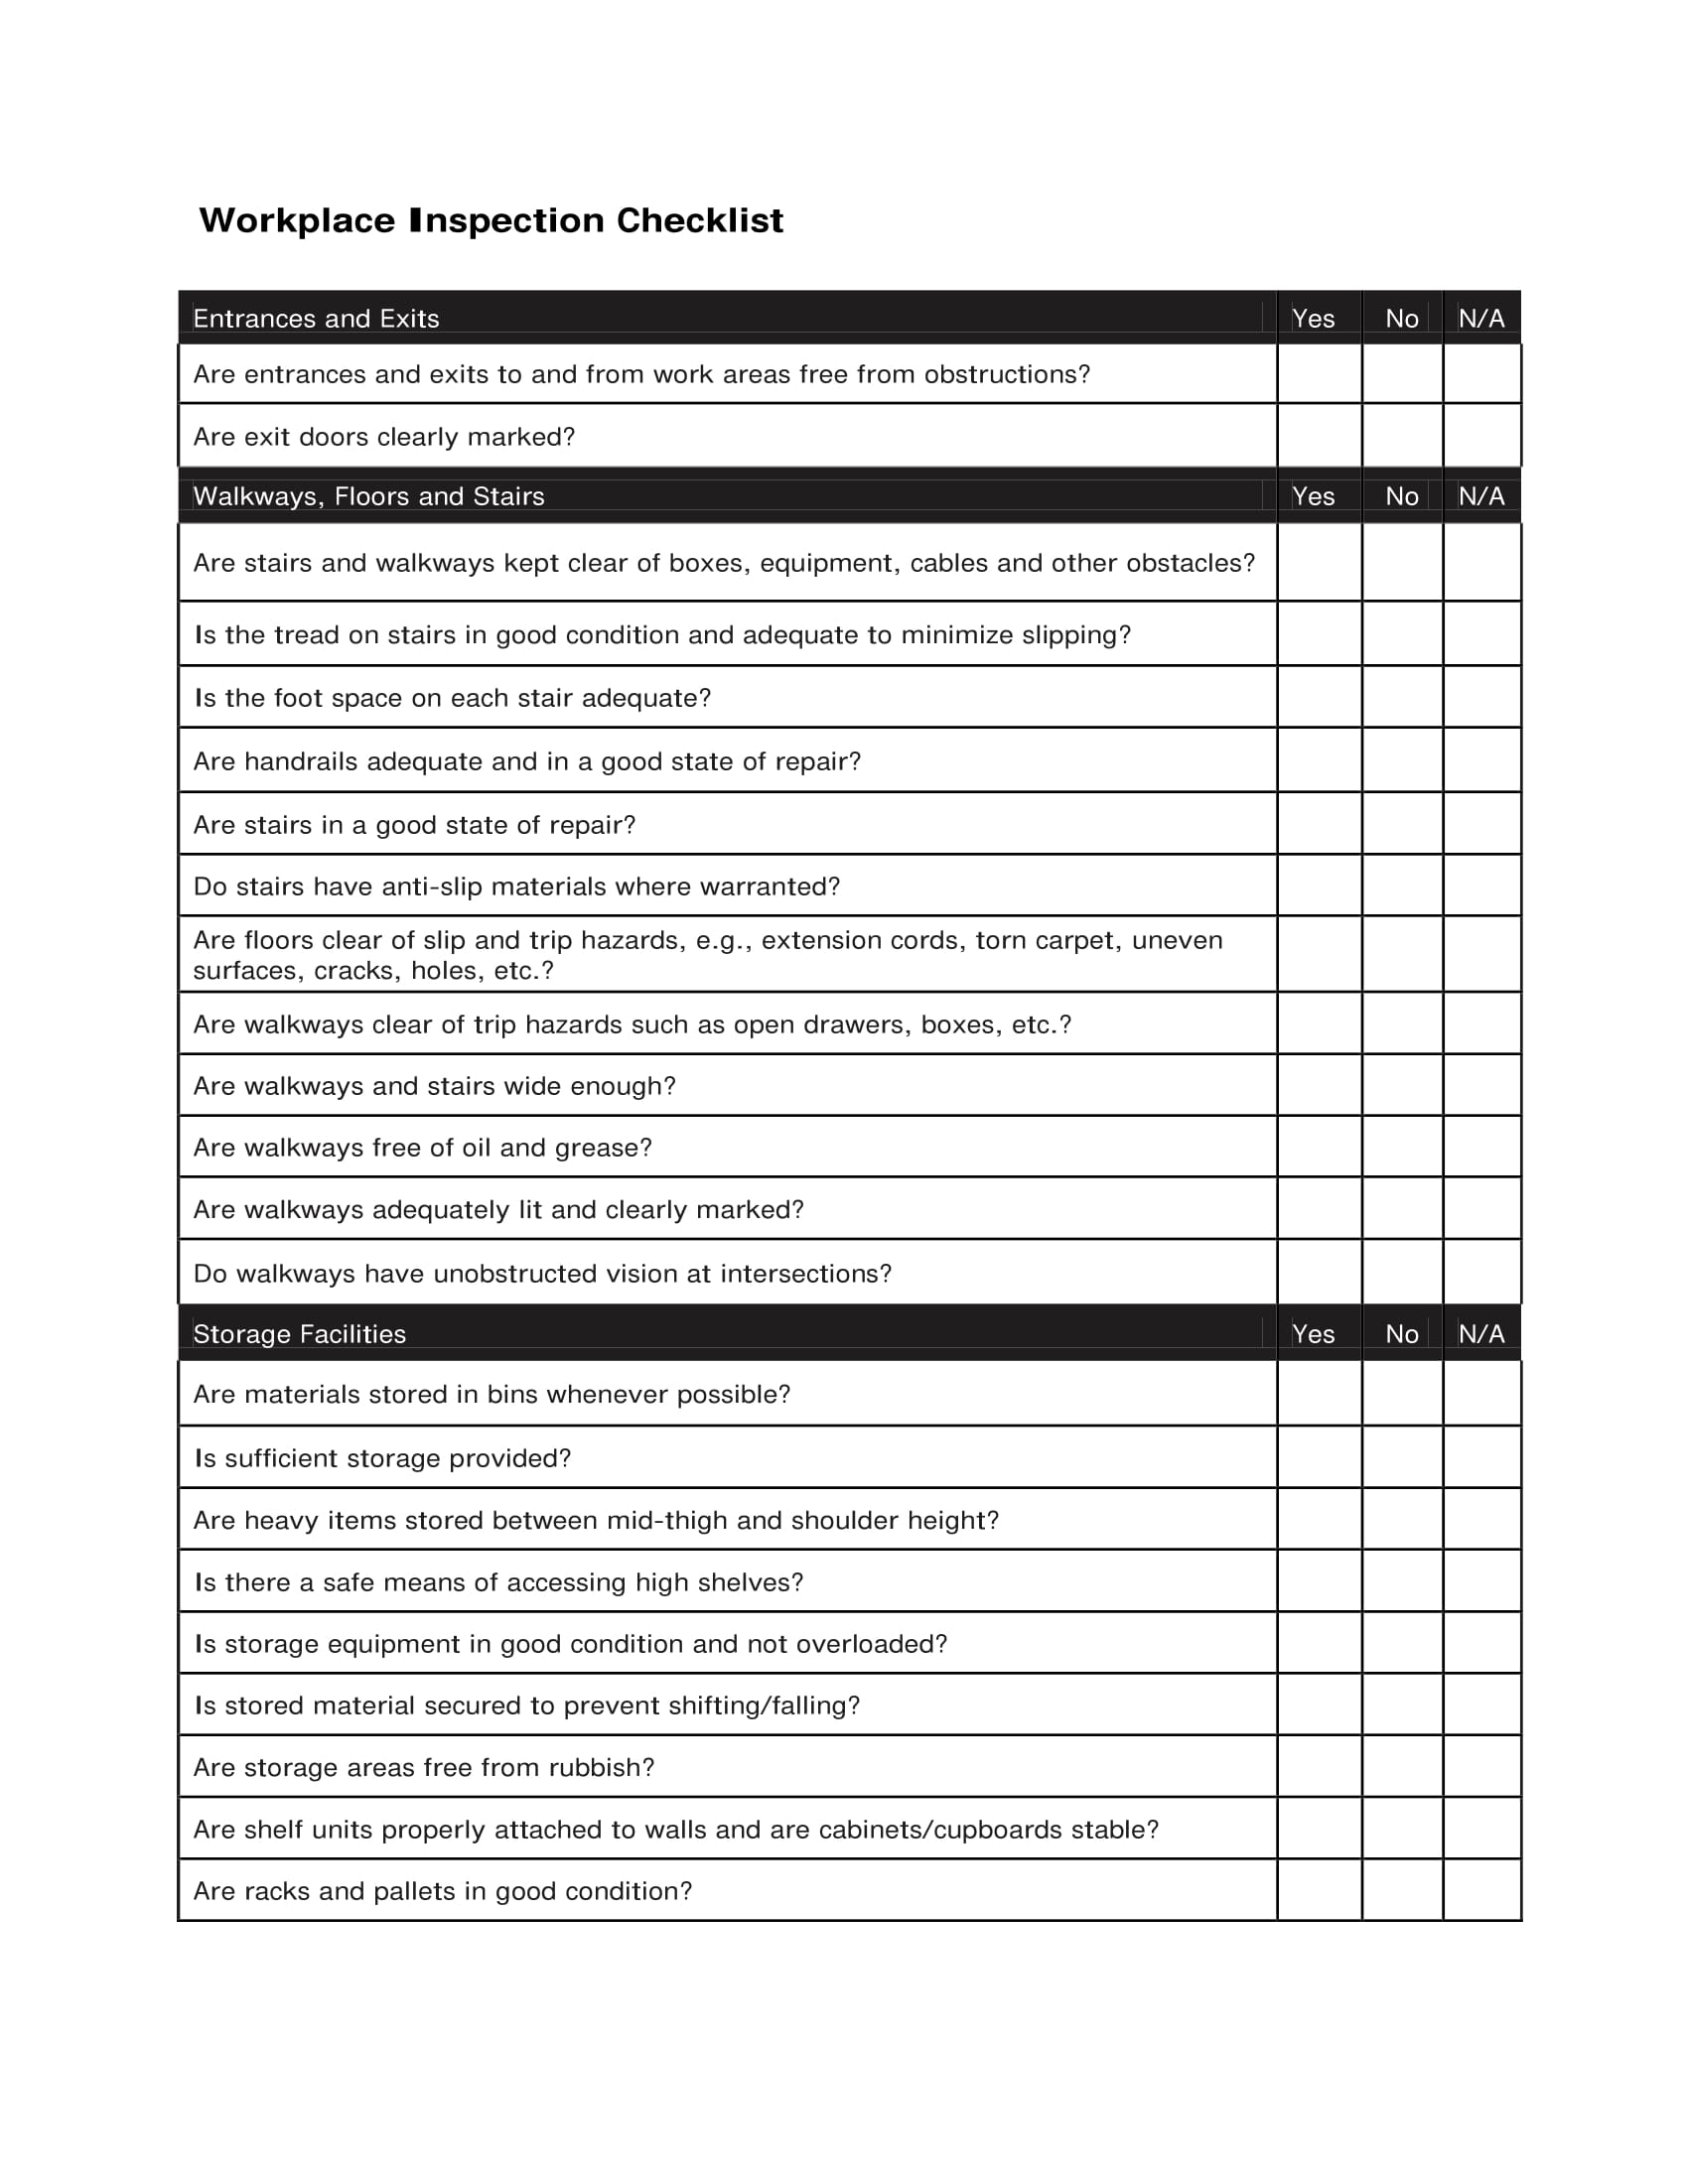 Workplace Inspection Checklist Examples Format Pdf Examples